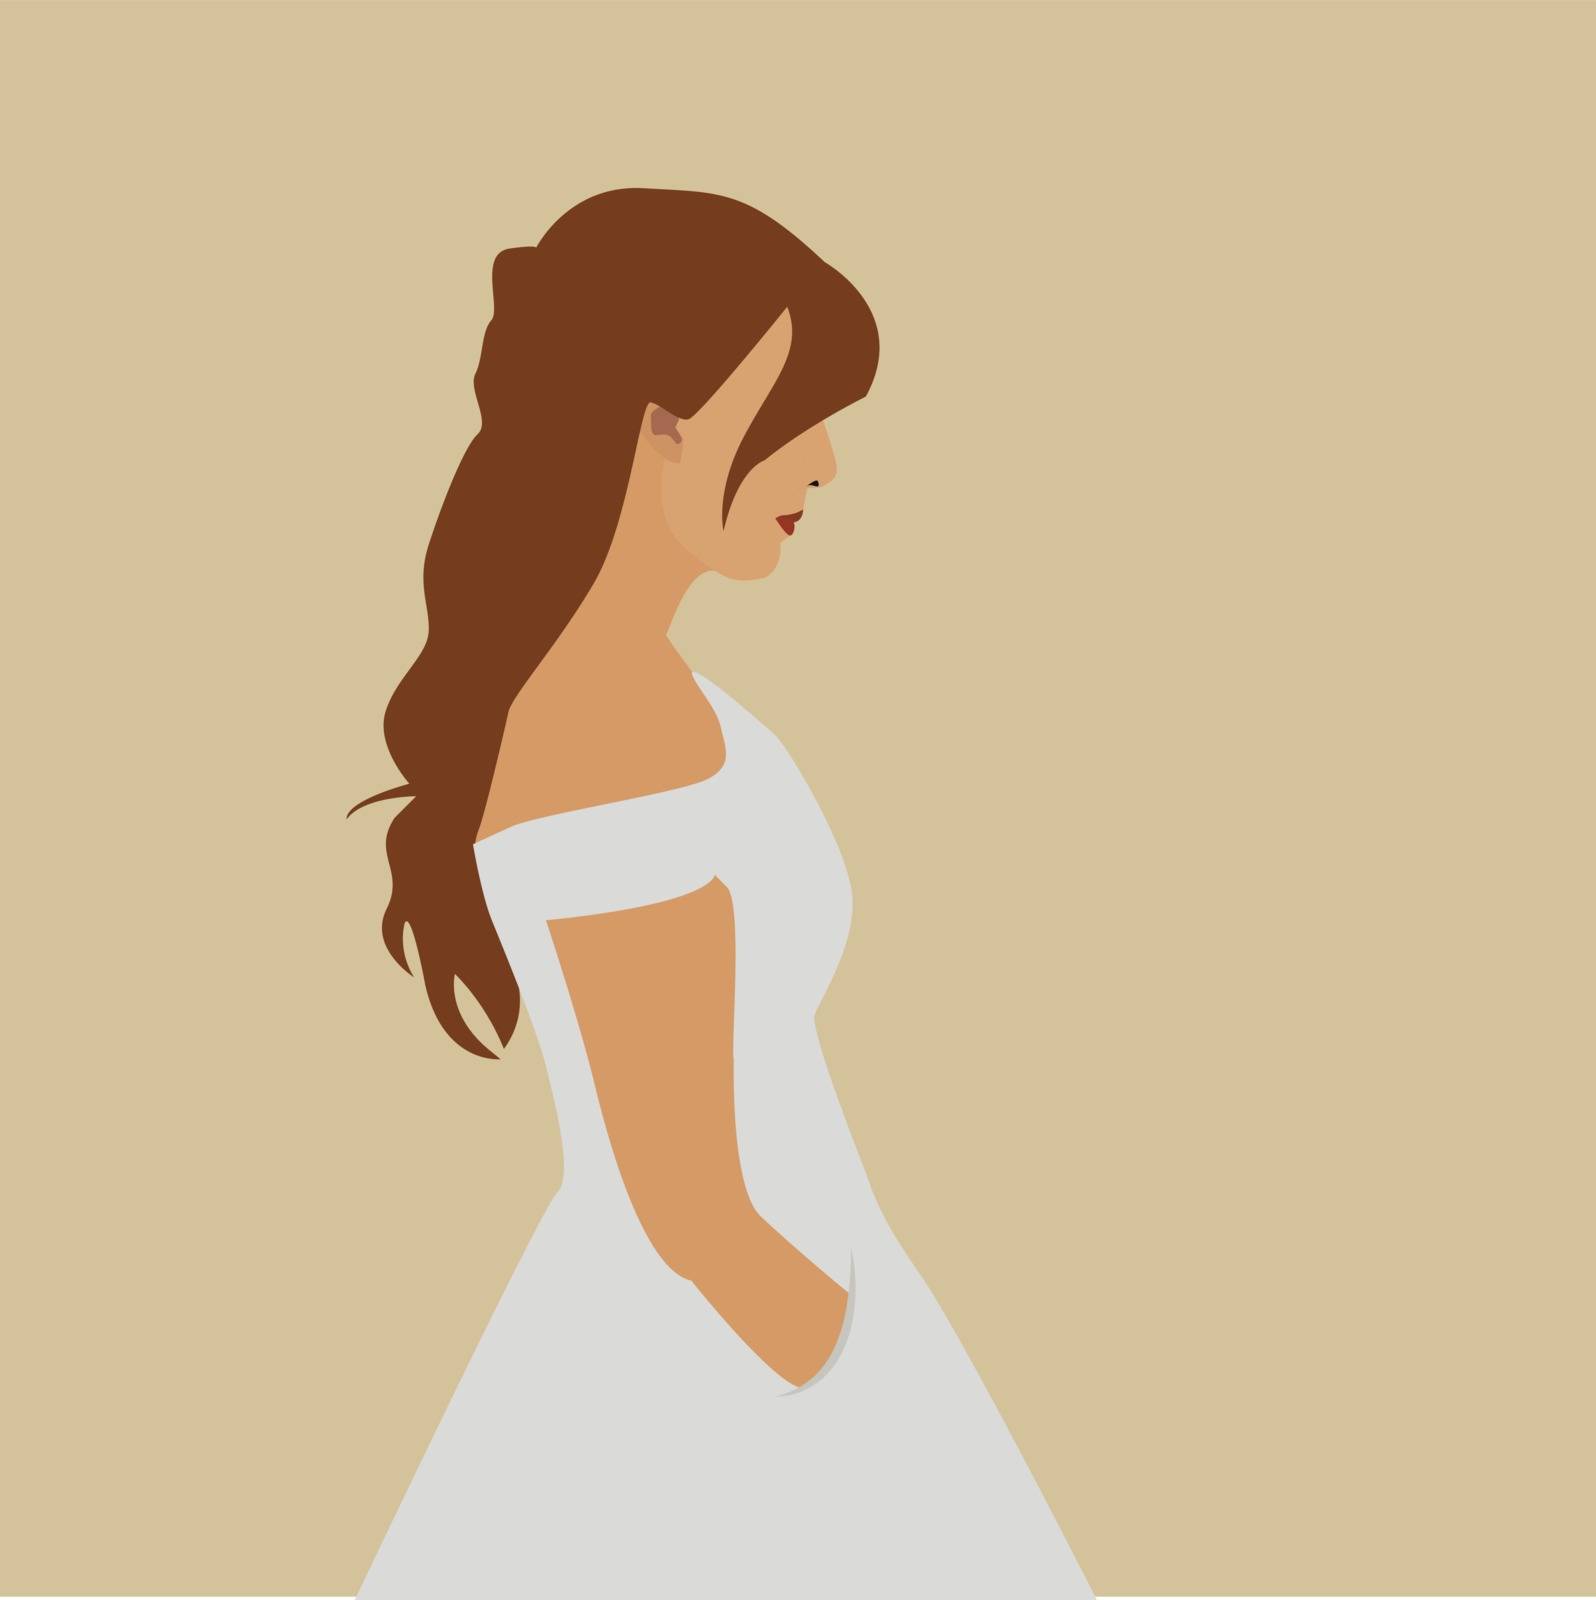 Woman in white dress, illustration, vector on white background.